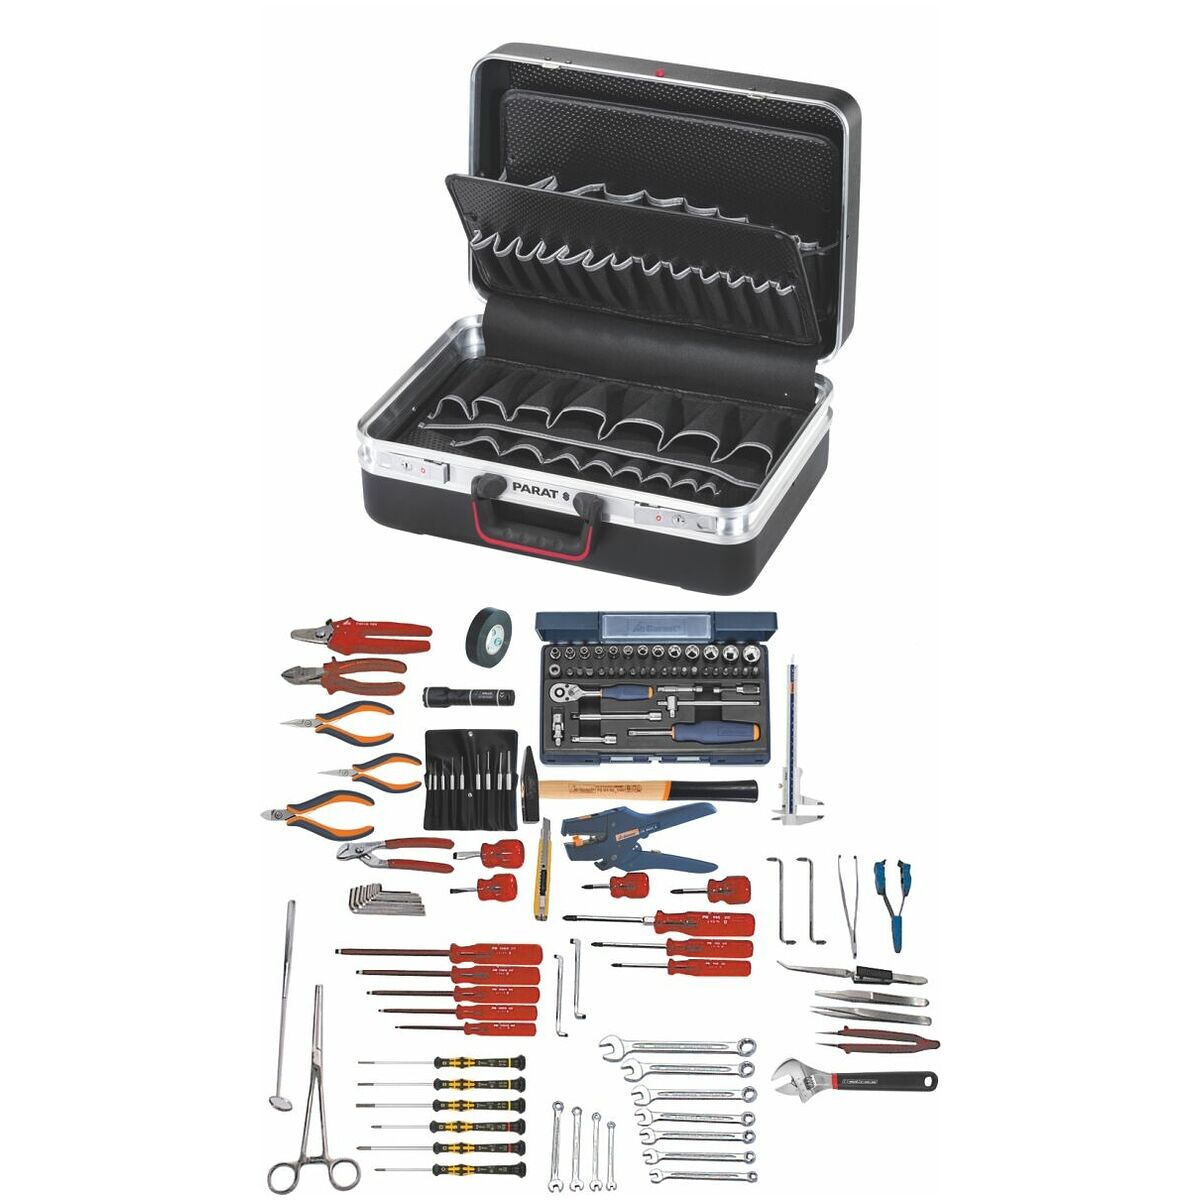 Simply buy Electronics tool 119 | kit 692000 with case pieces Hoffmann aluminium Group No. tool